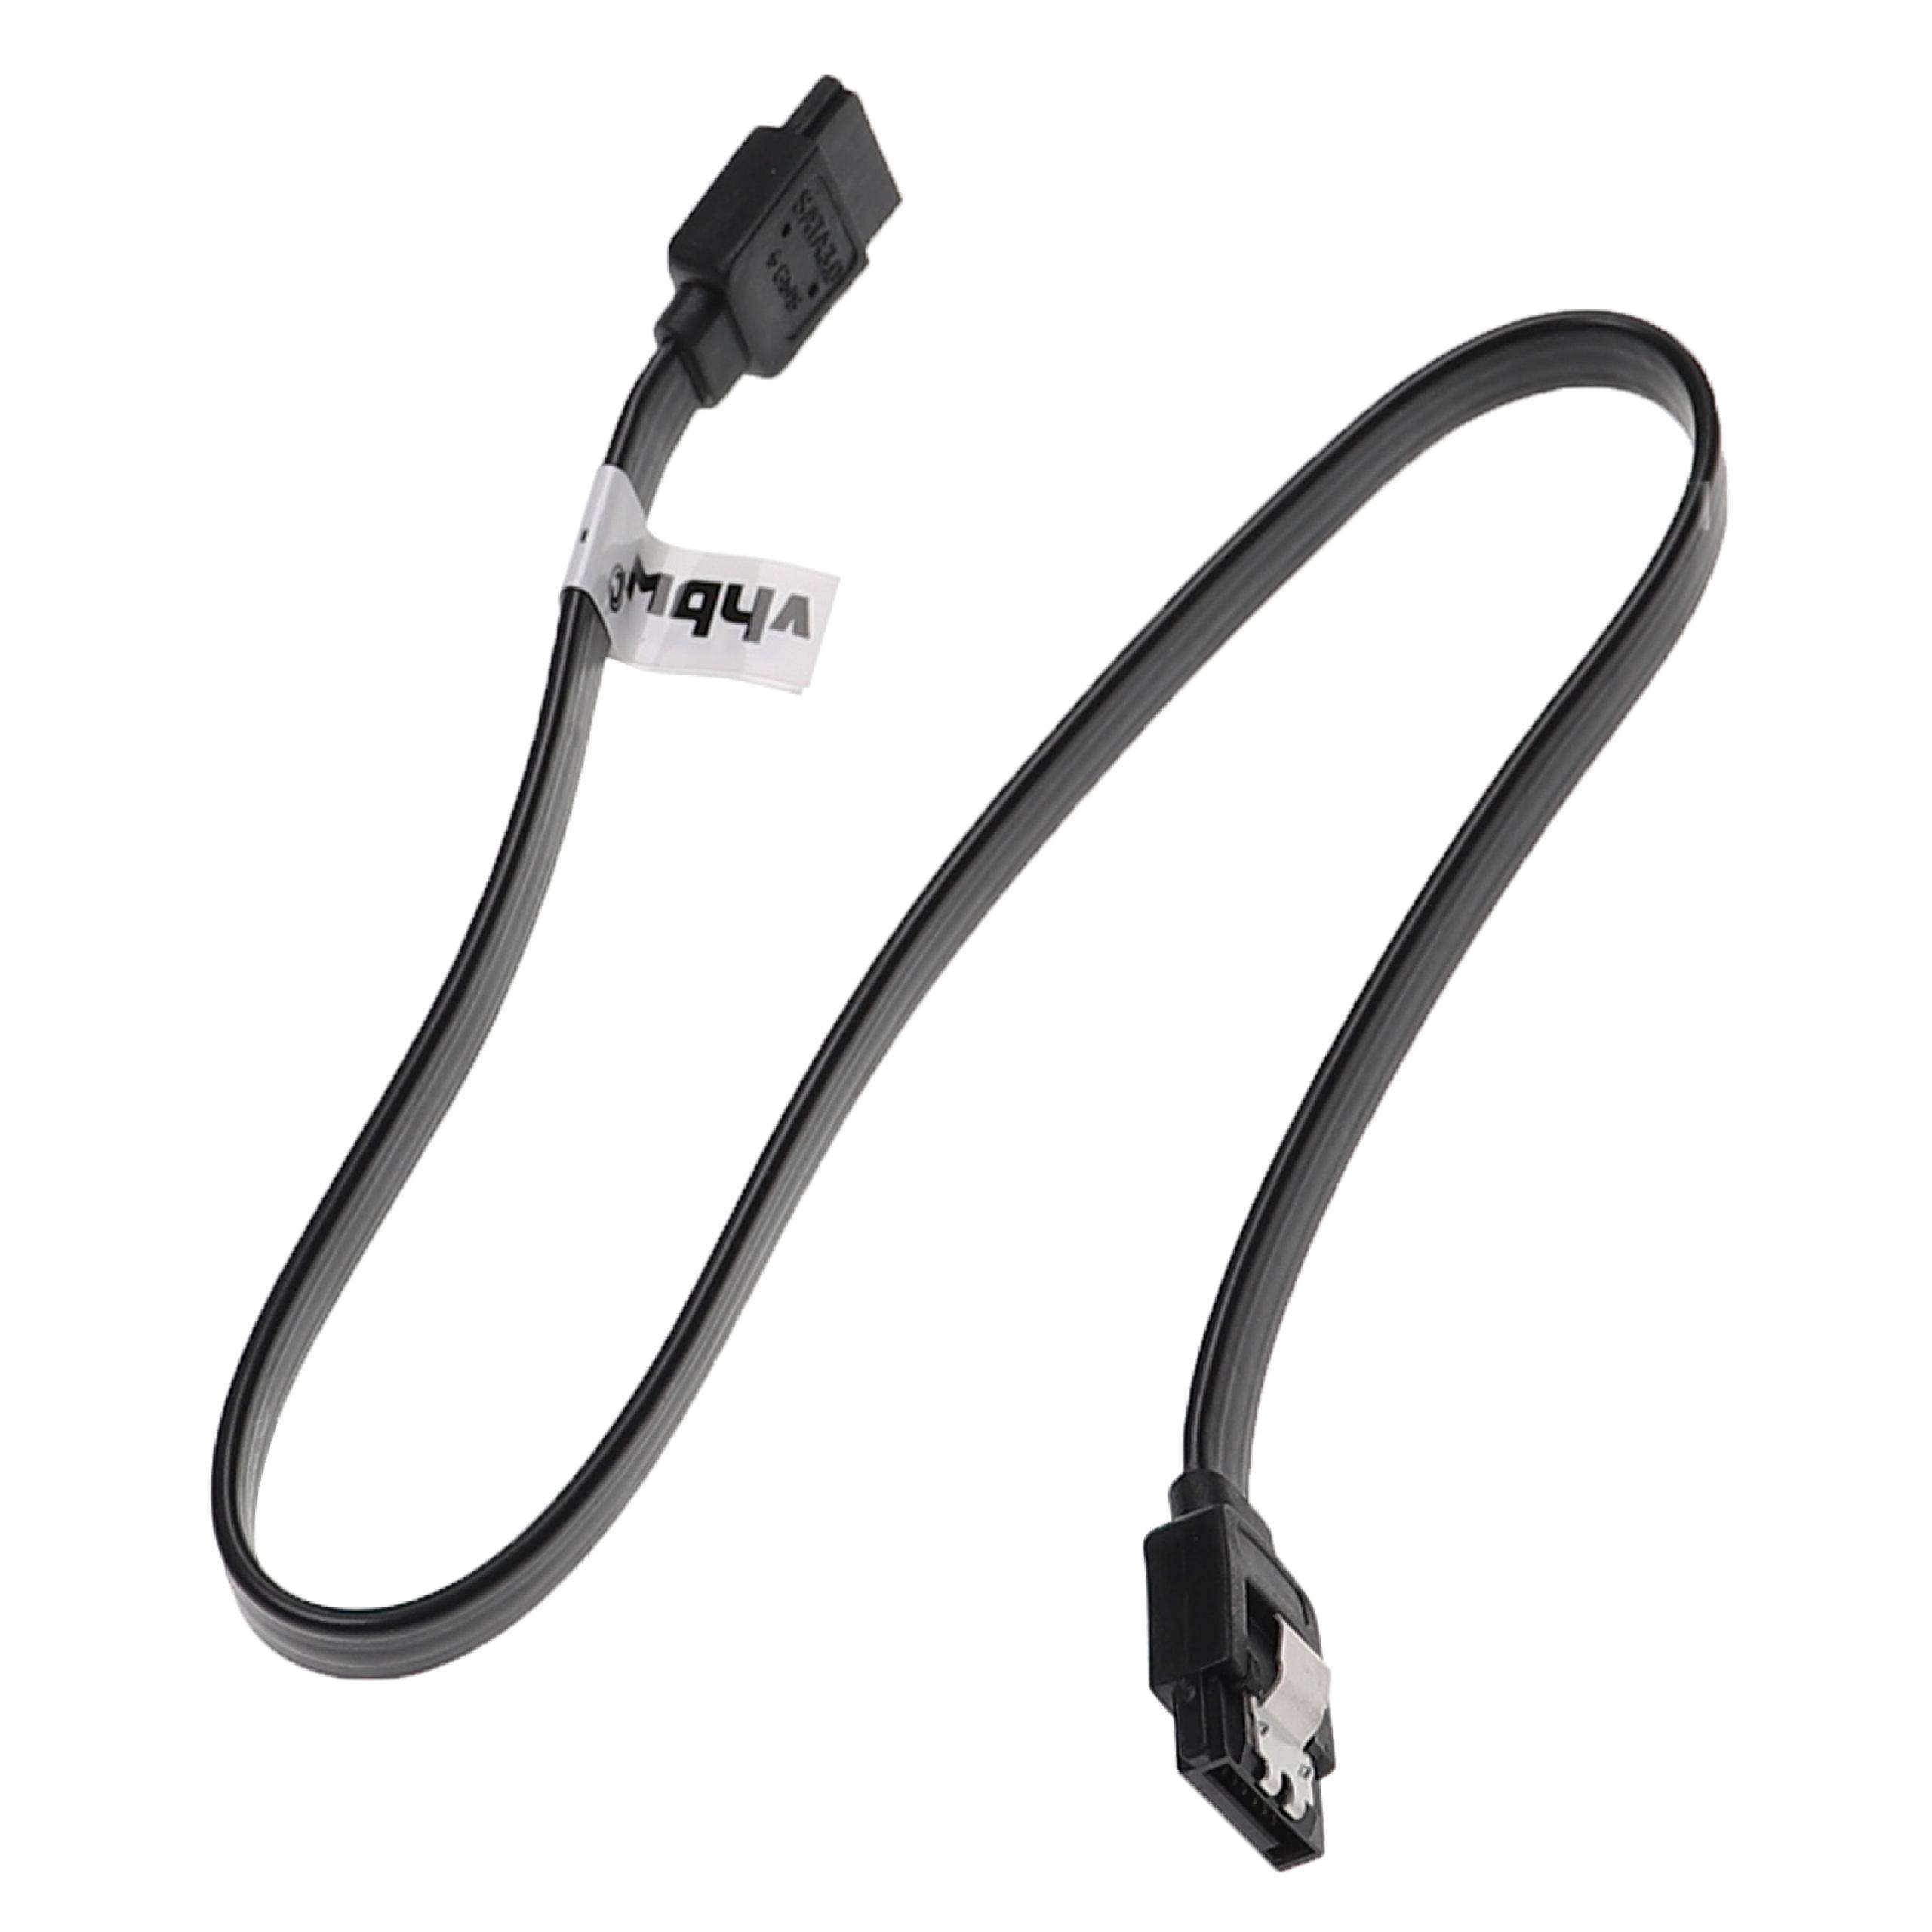 SATA Cable Straight - Straight suitable for Hard Drives - Data Cable, 40 cm